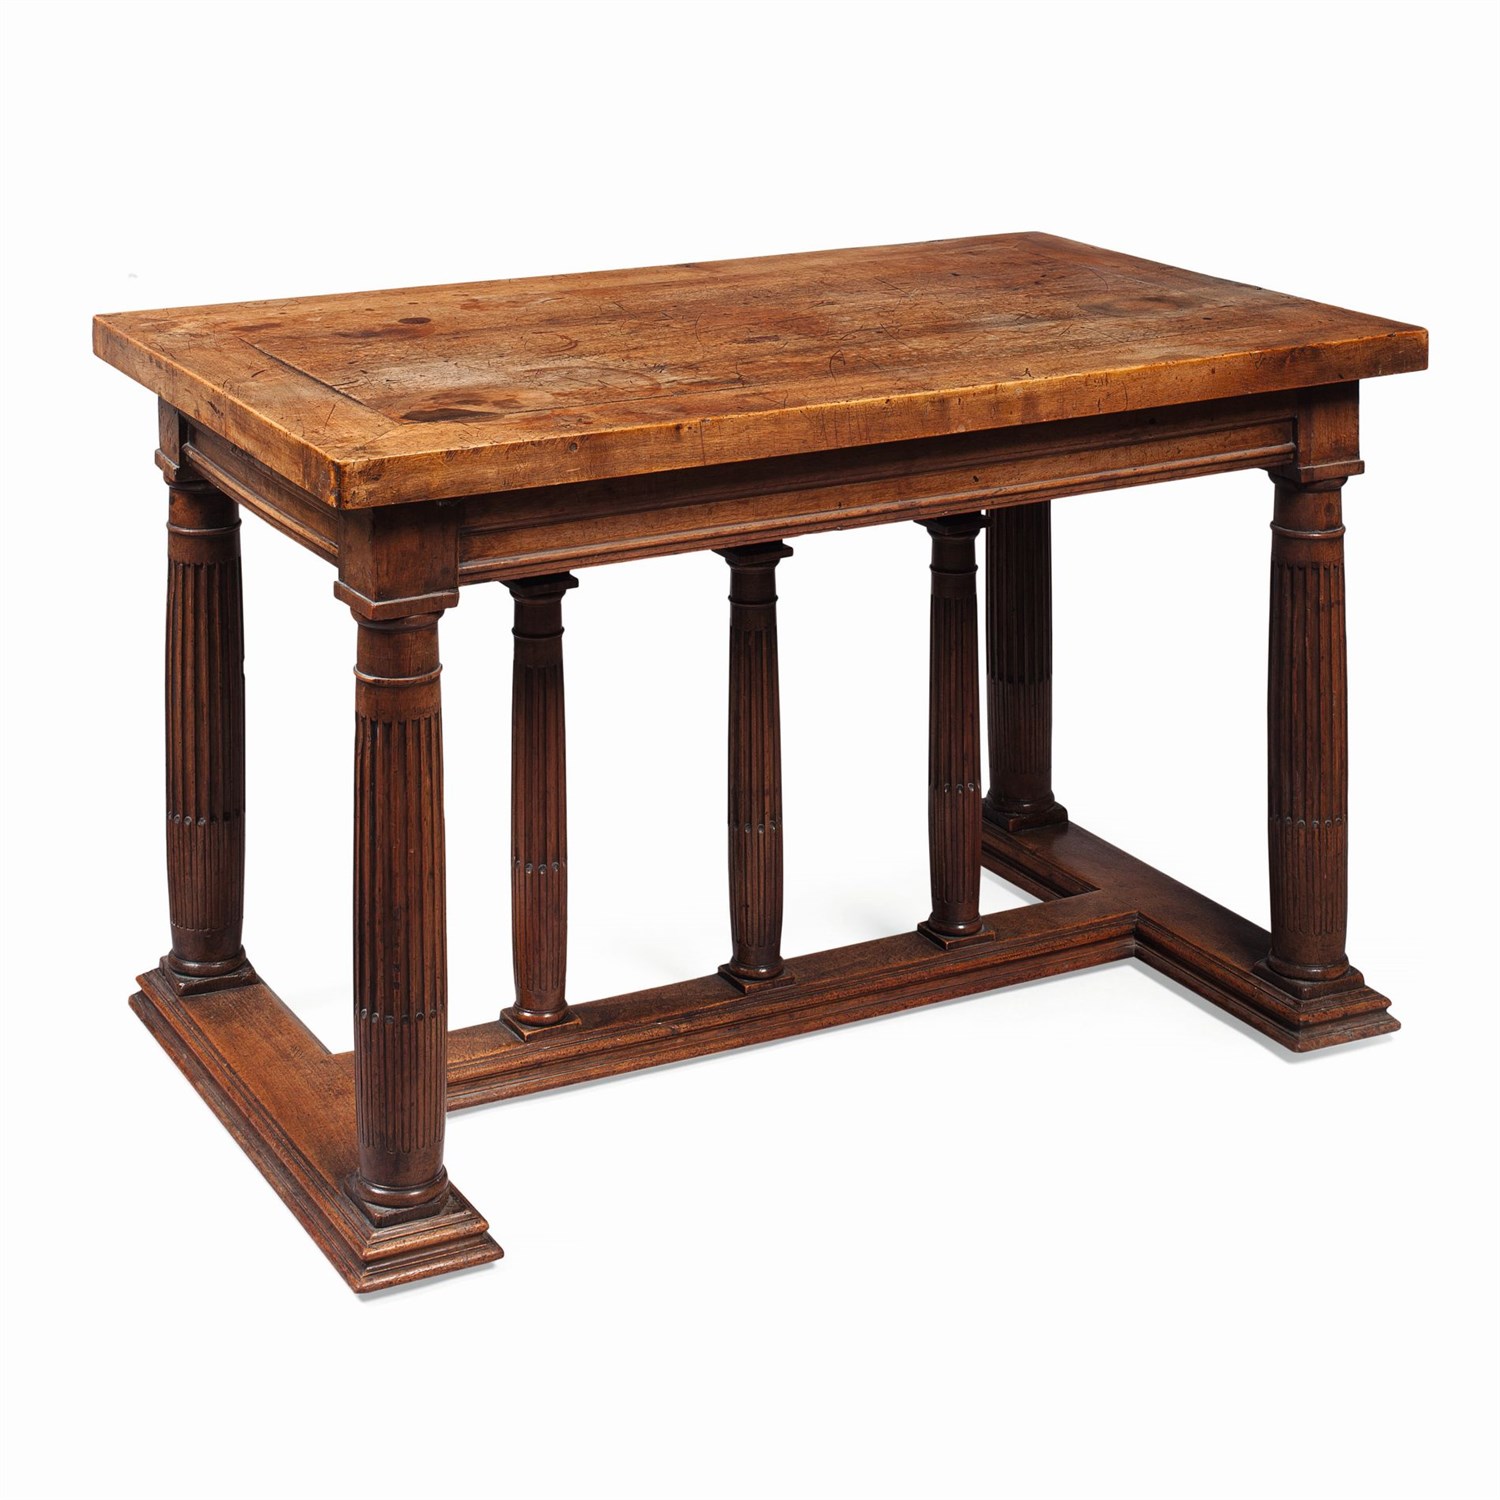 Lot 100 - FRENCH WALNUT SIDE TABLE